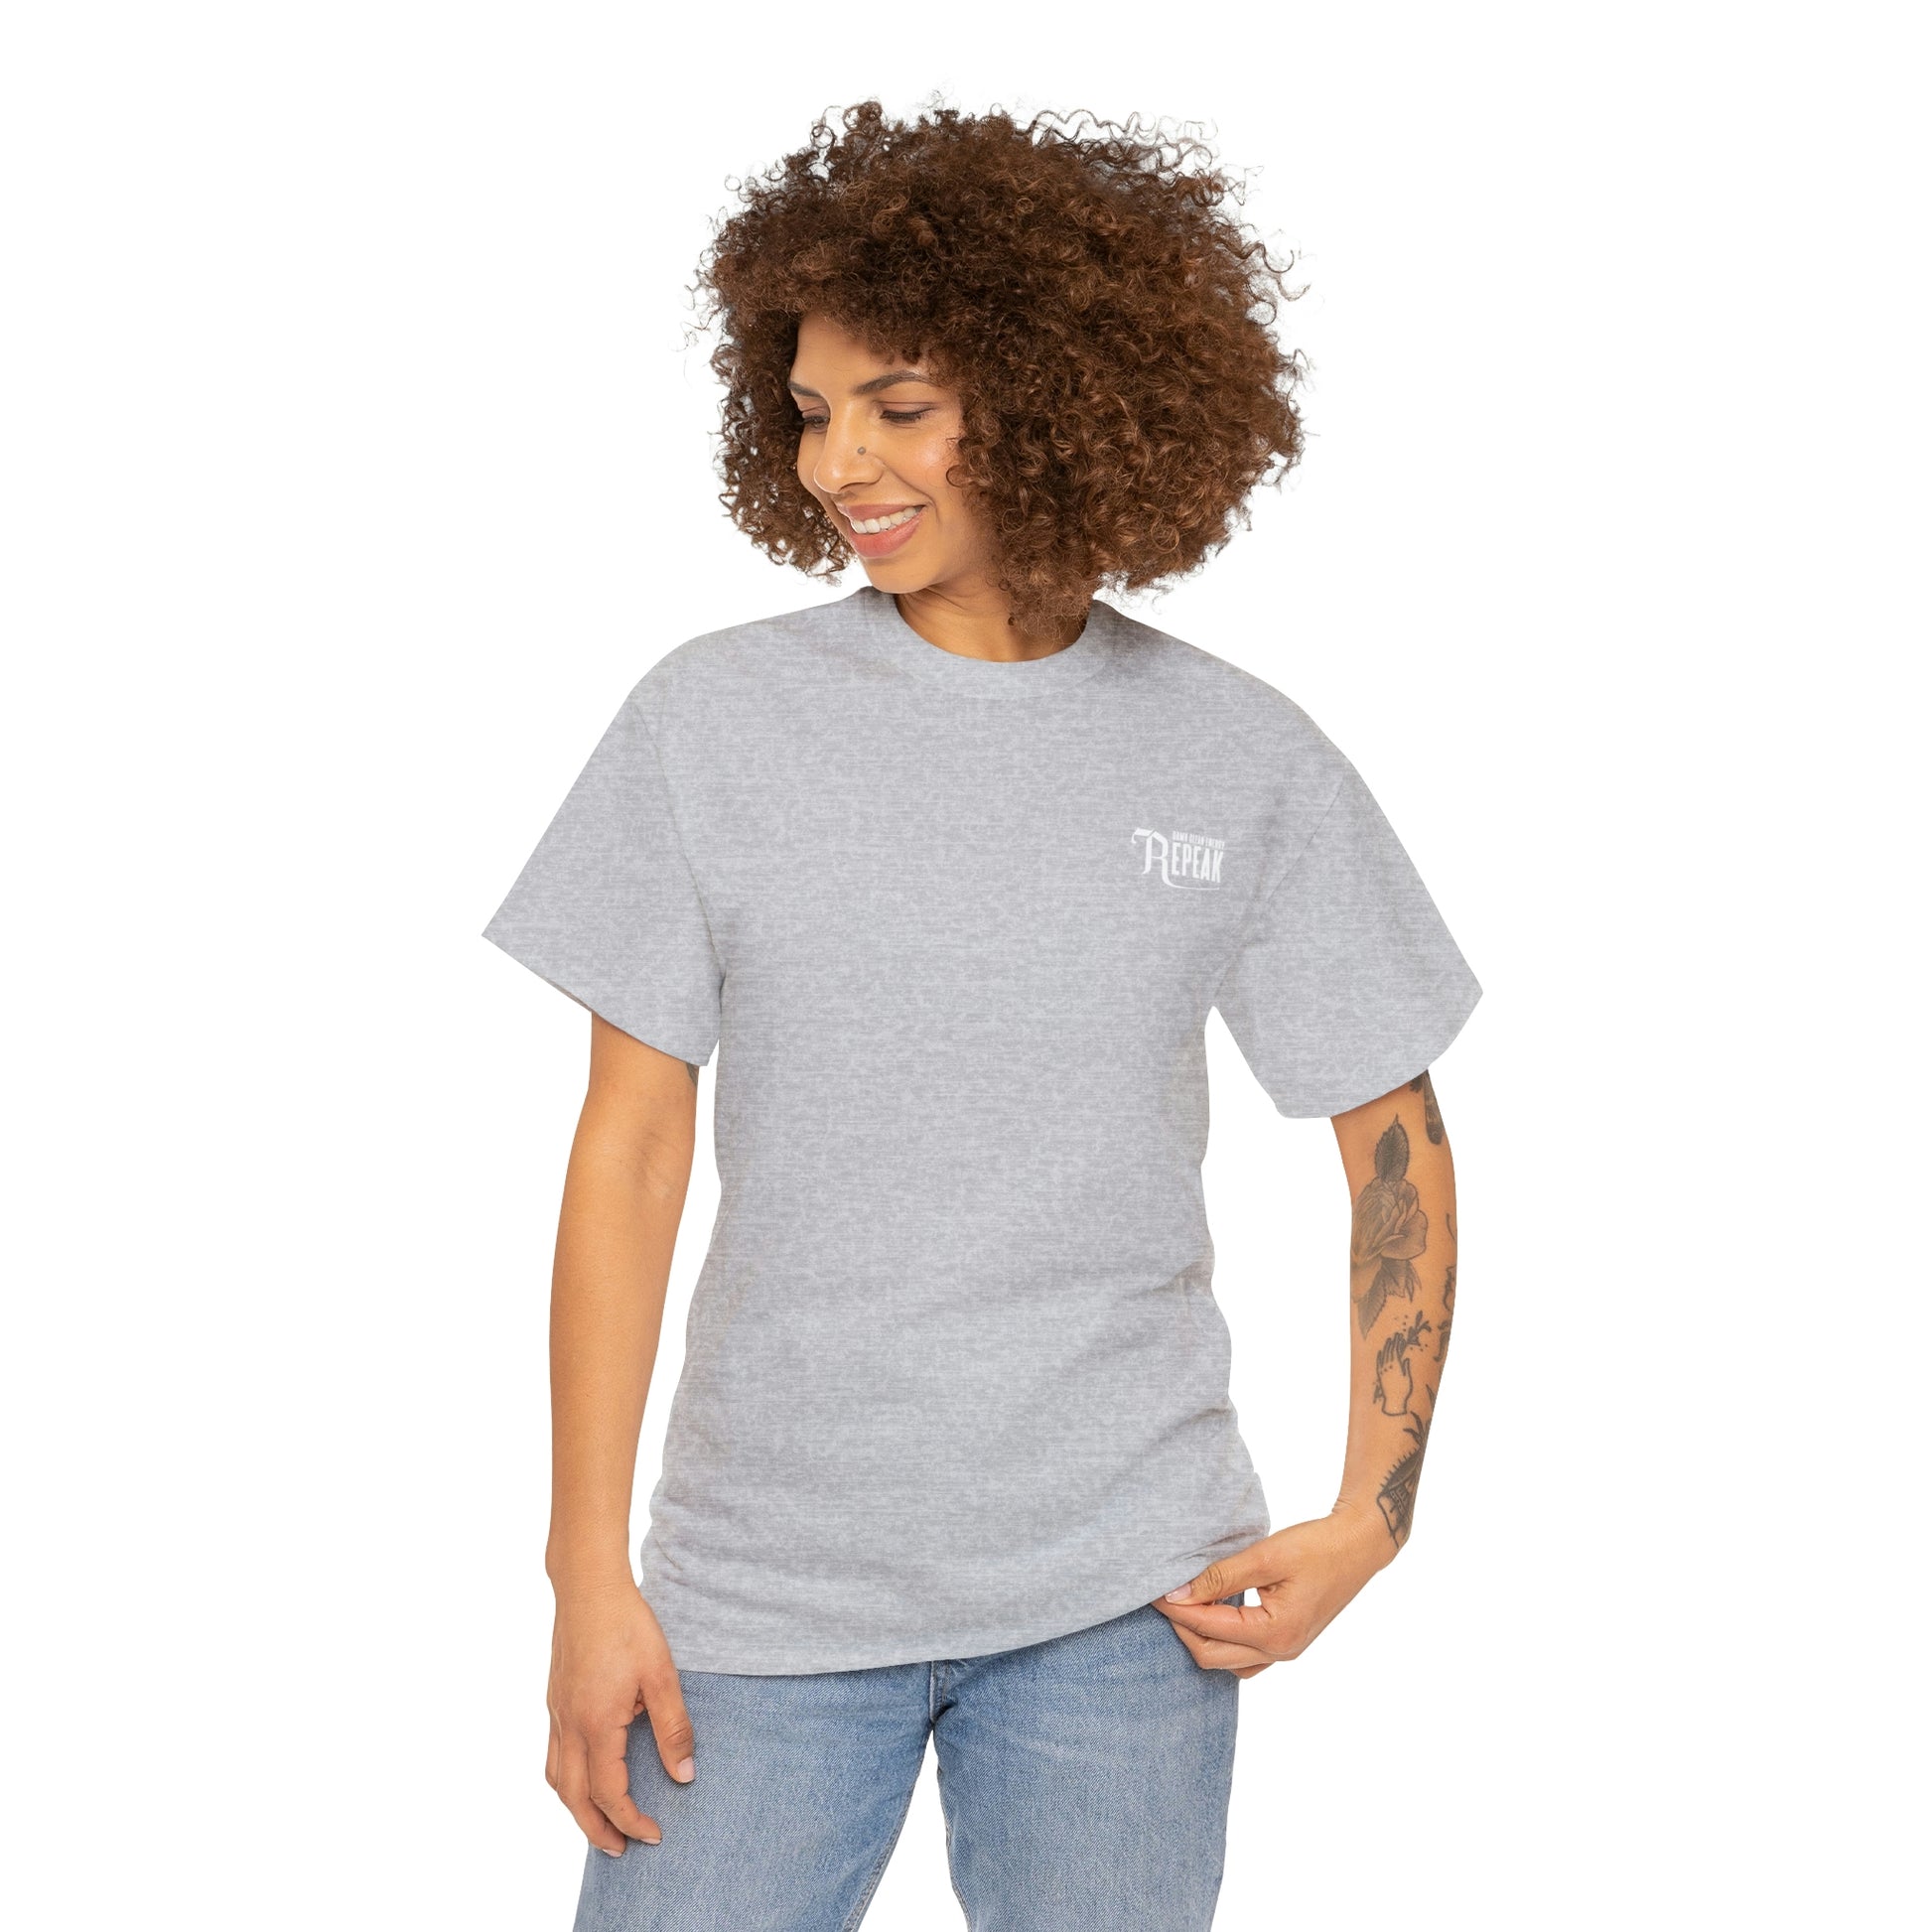 repeak energy drink gray t-shirt, front side with female model